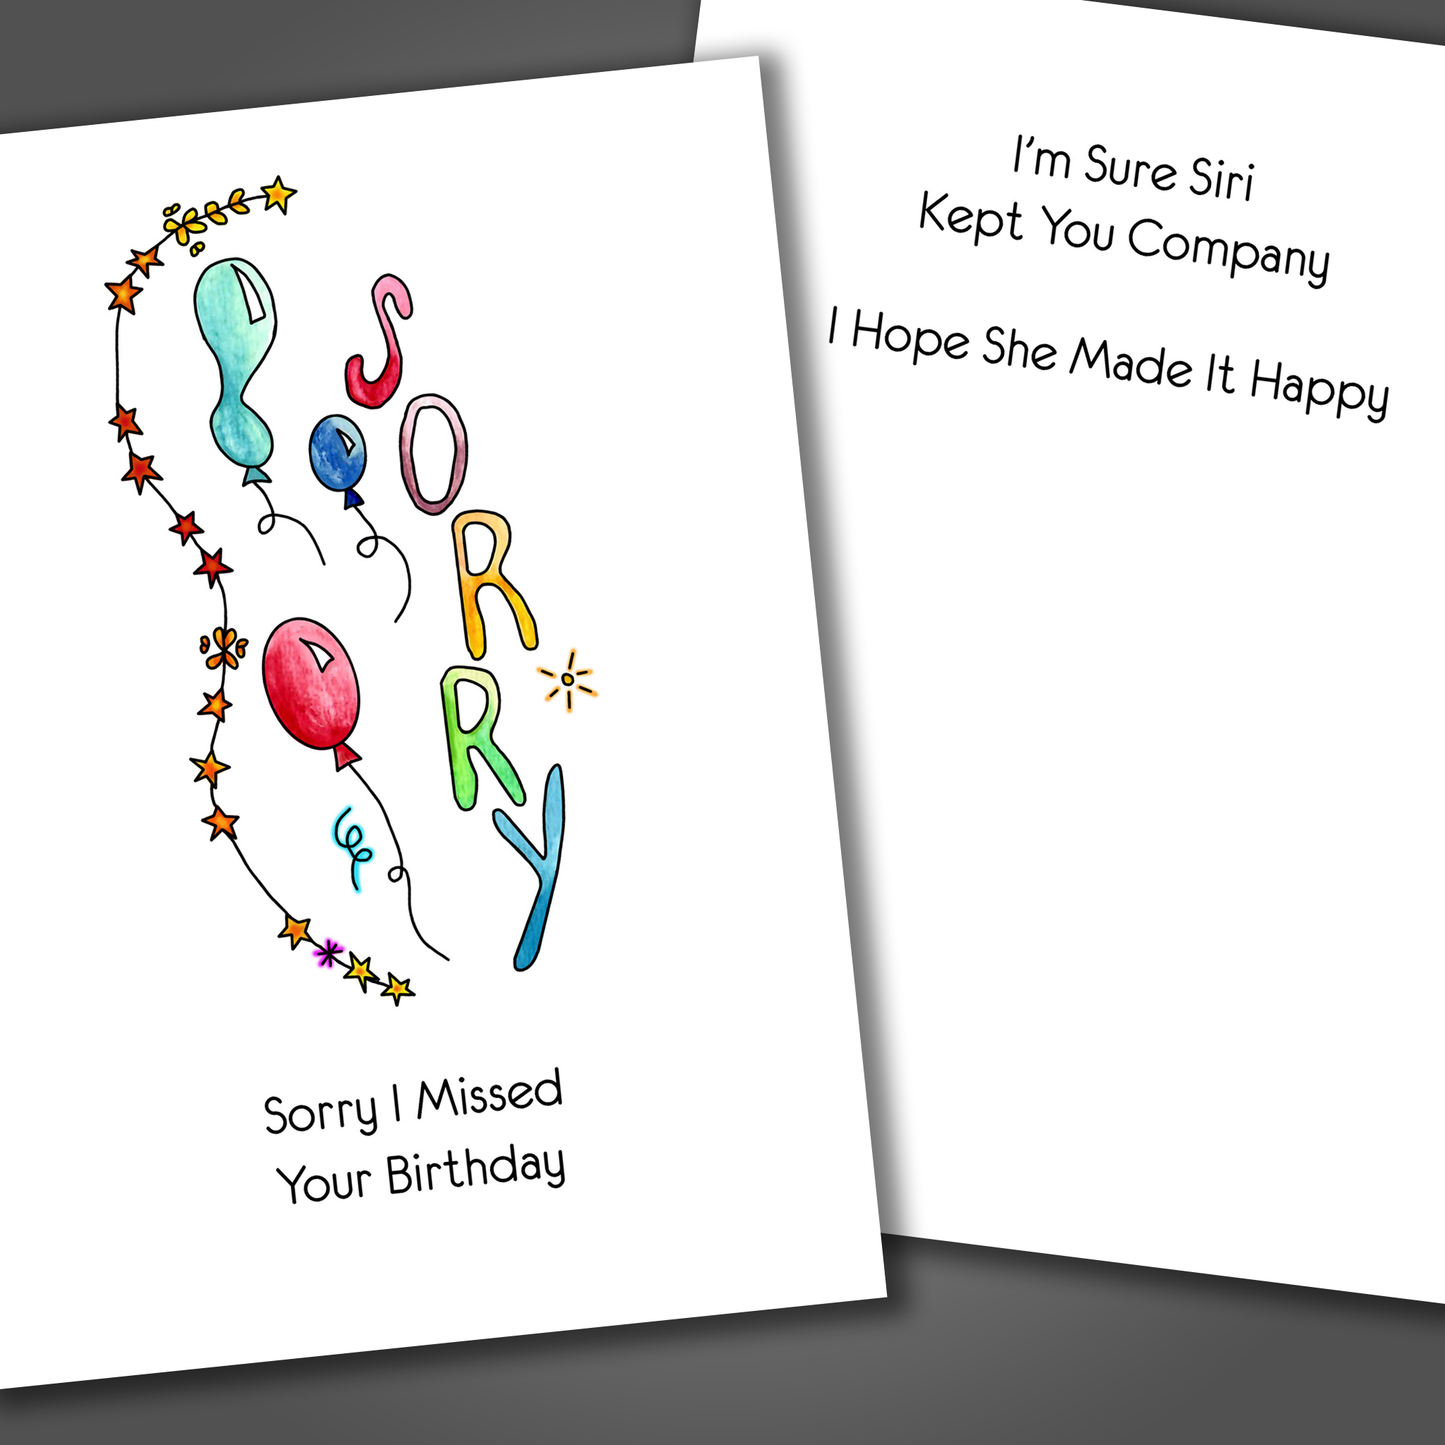 Funny belated birthday card with balloons on the front of the card and a funny joke inside of the card that says I hope Siri made you happy.